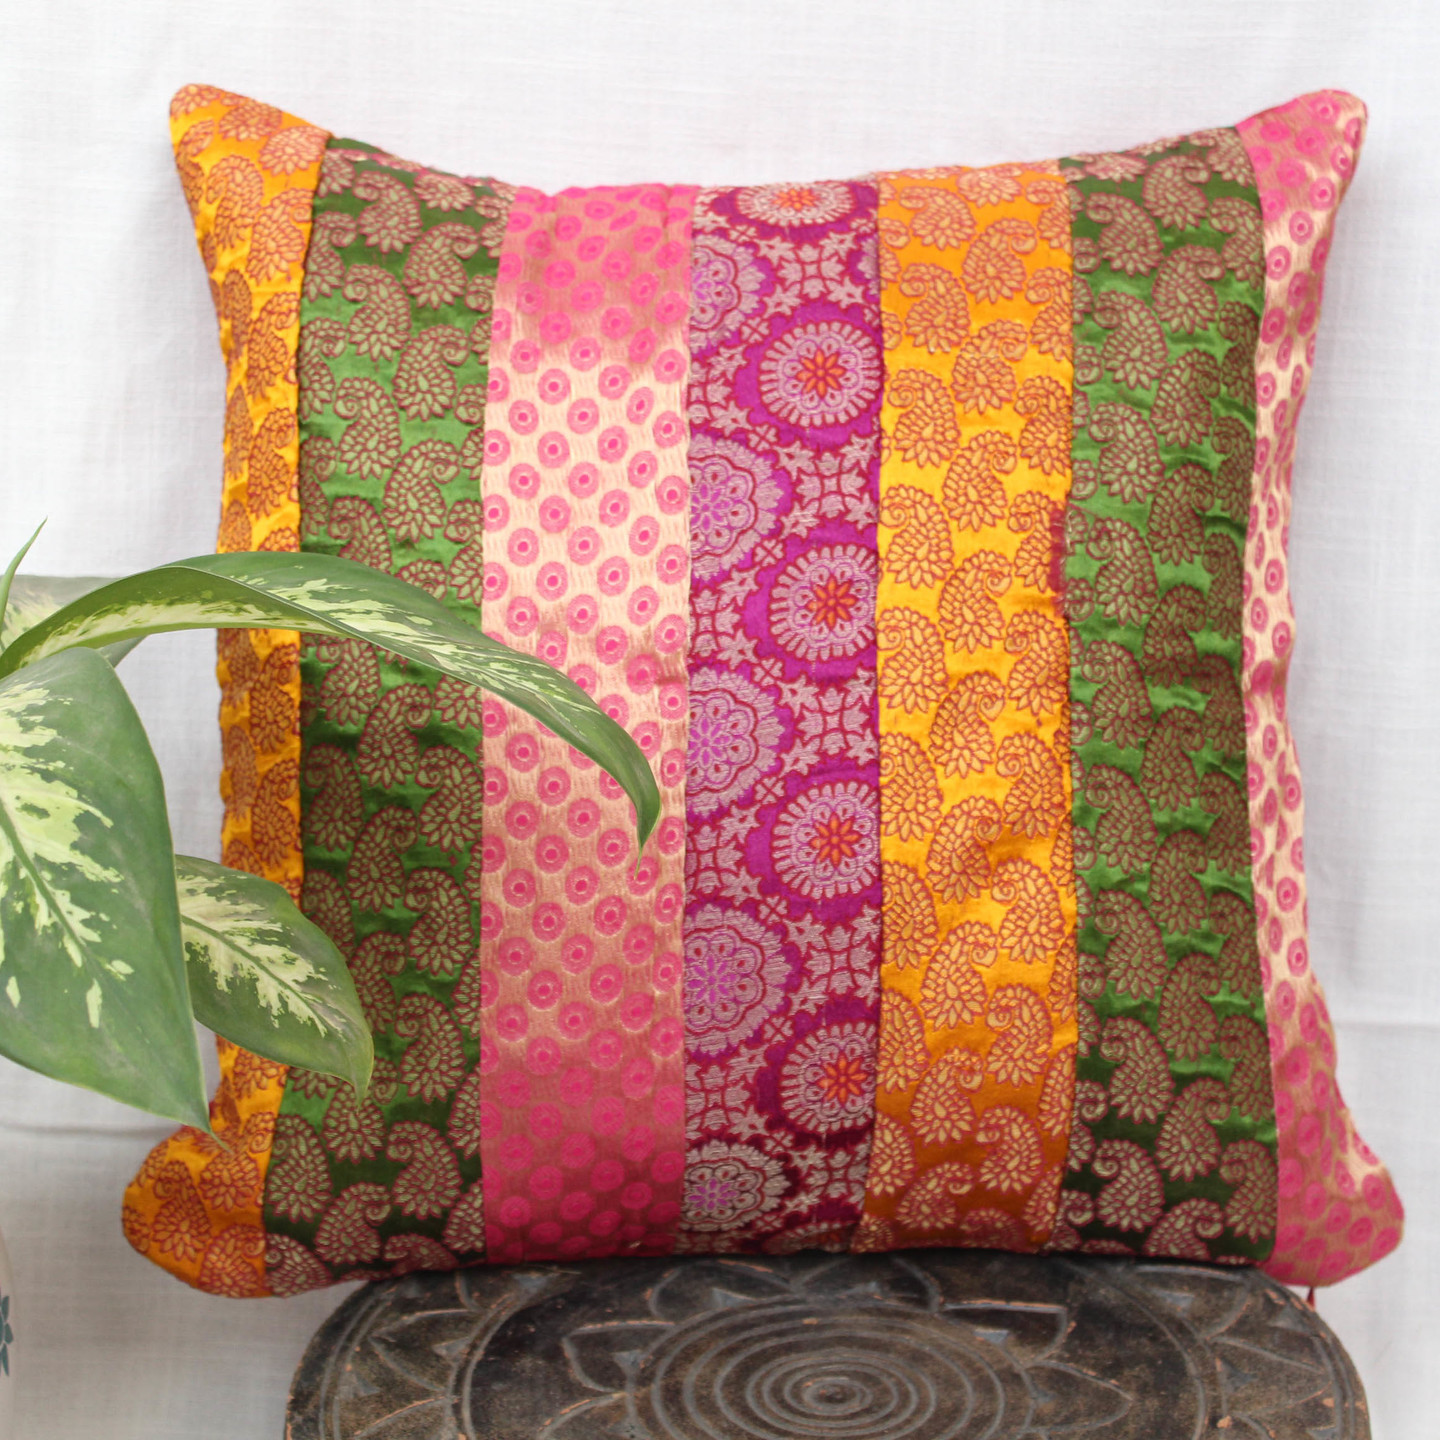 Multi Colored Brocade patch Cushion Cover 16x16